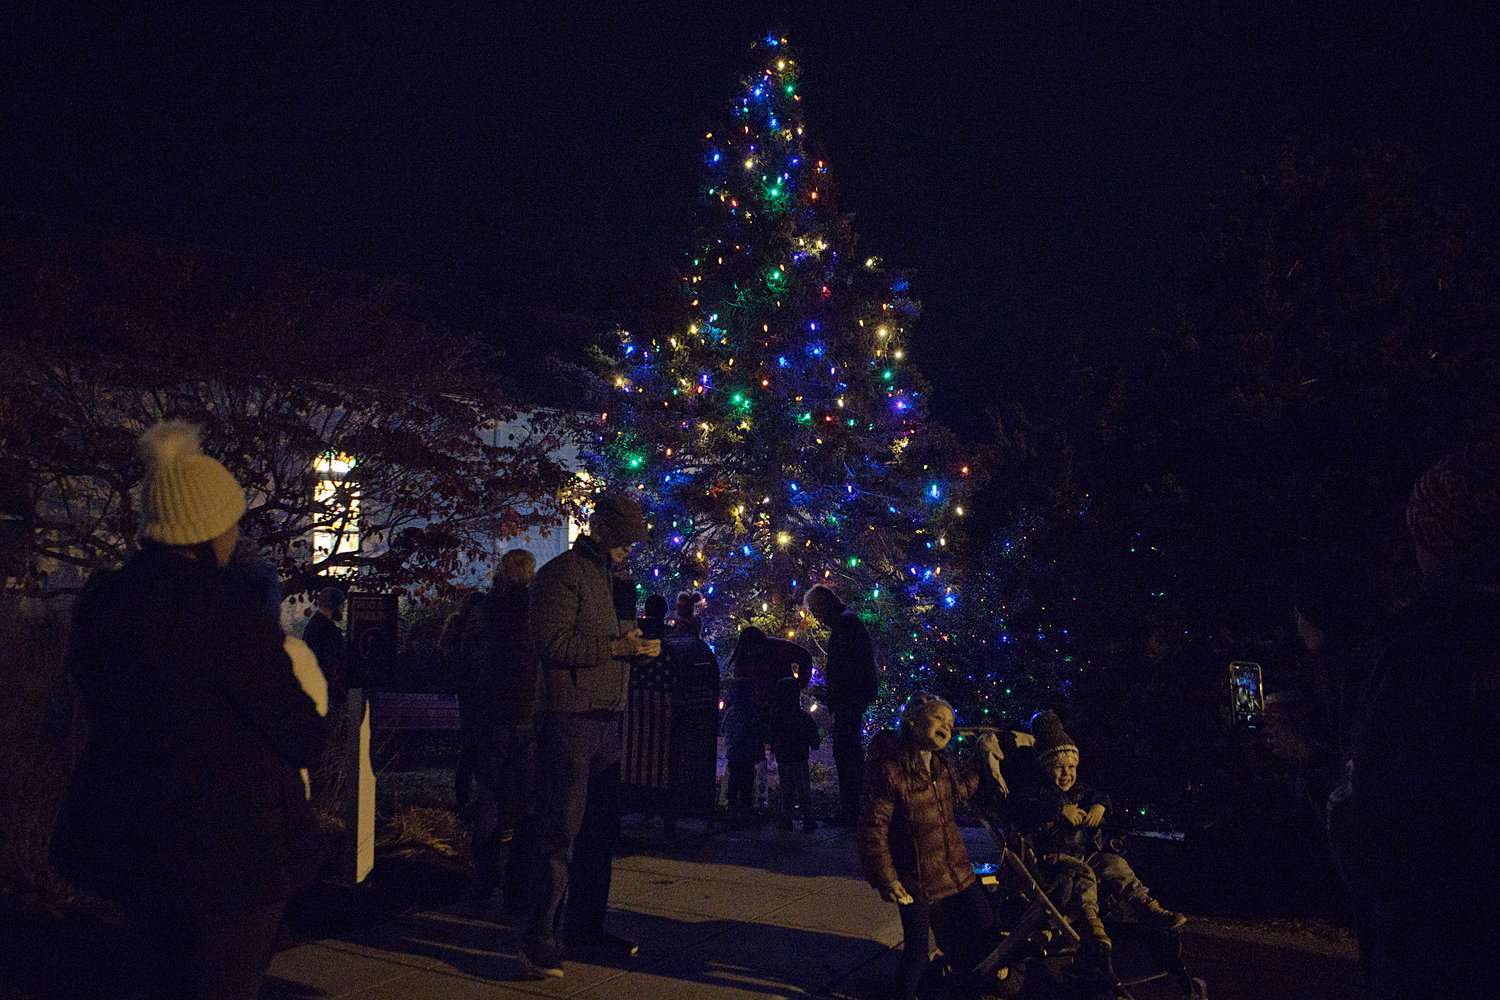 The tree outside the library glows in the evening air.